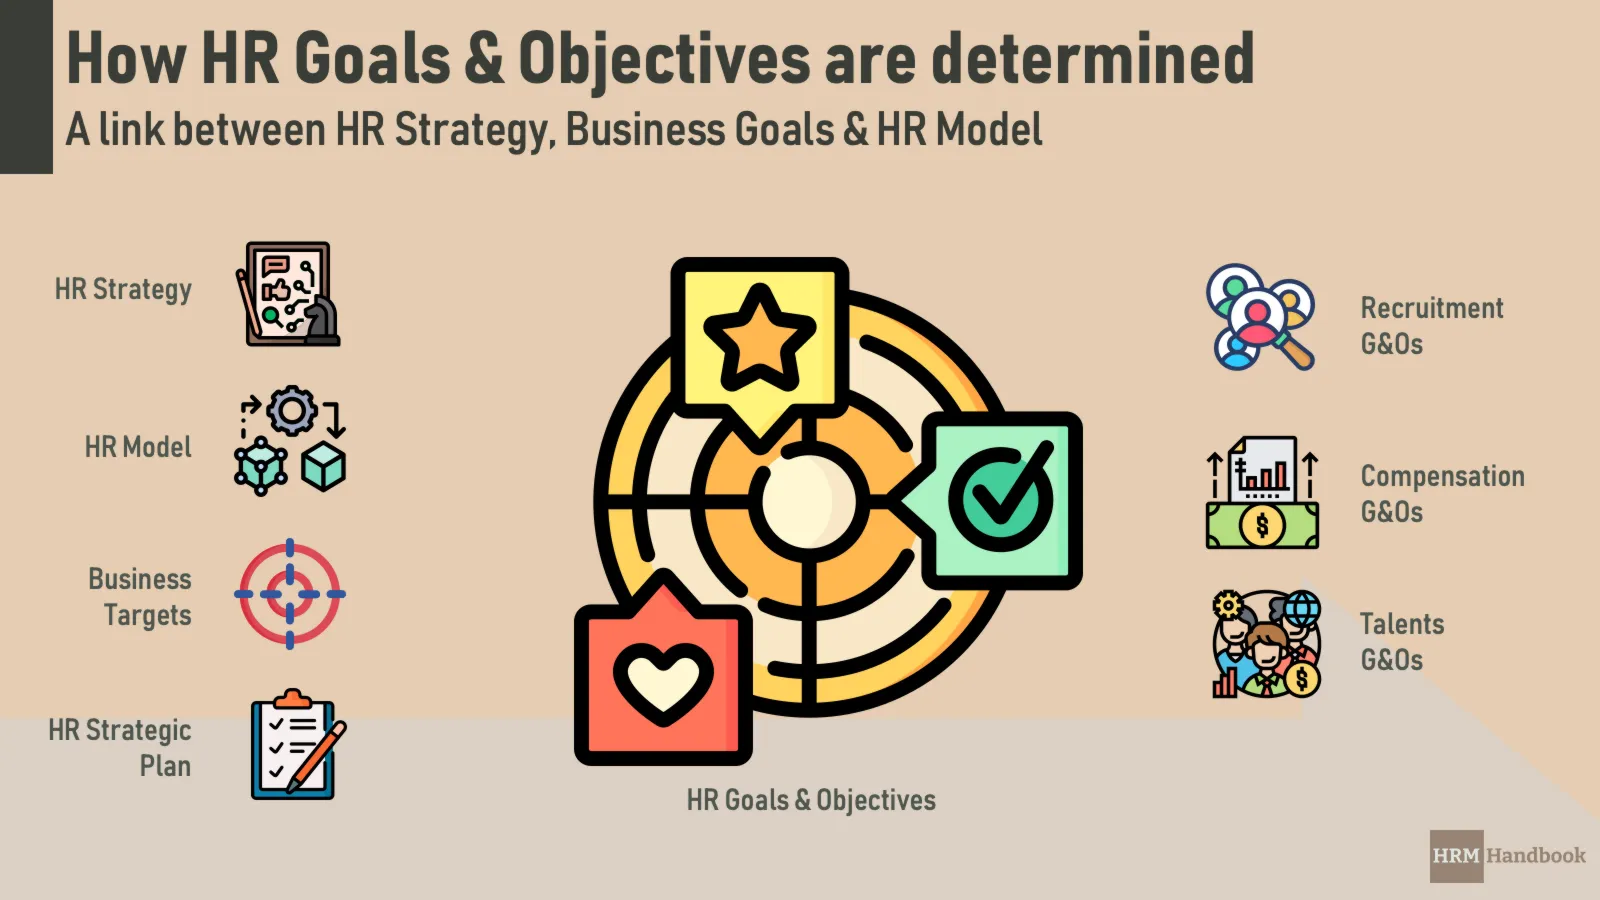 HR Goals and Objectives: How are they linked with HR Strategy, Business Targets, HR Model and HR Strategic Plan